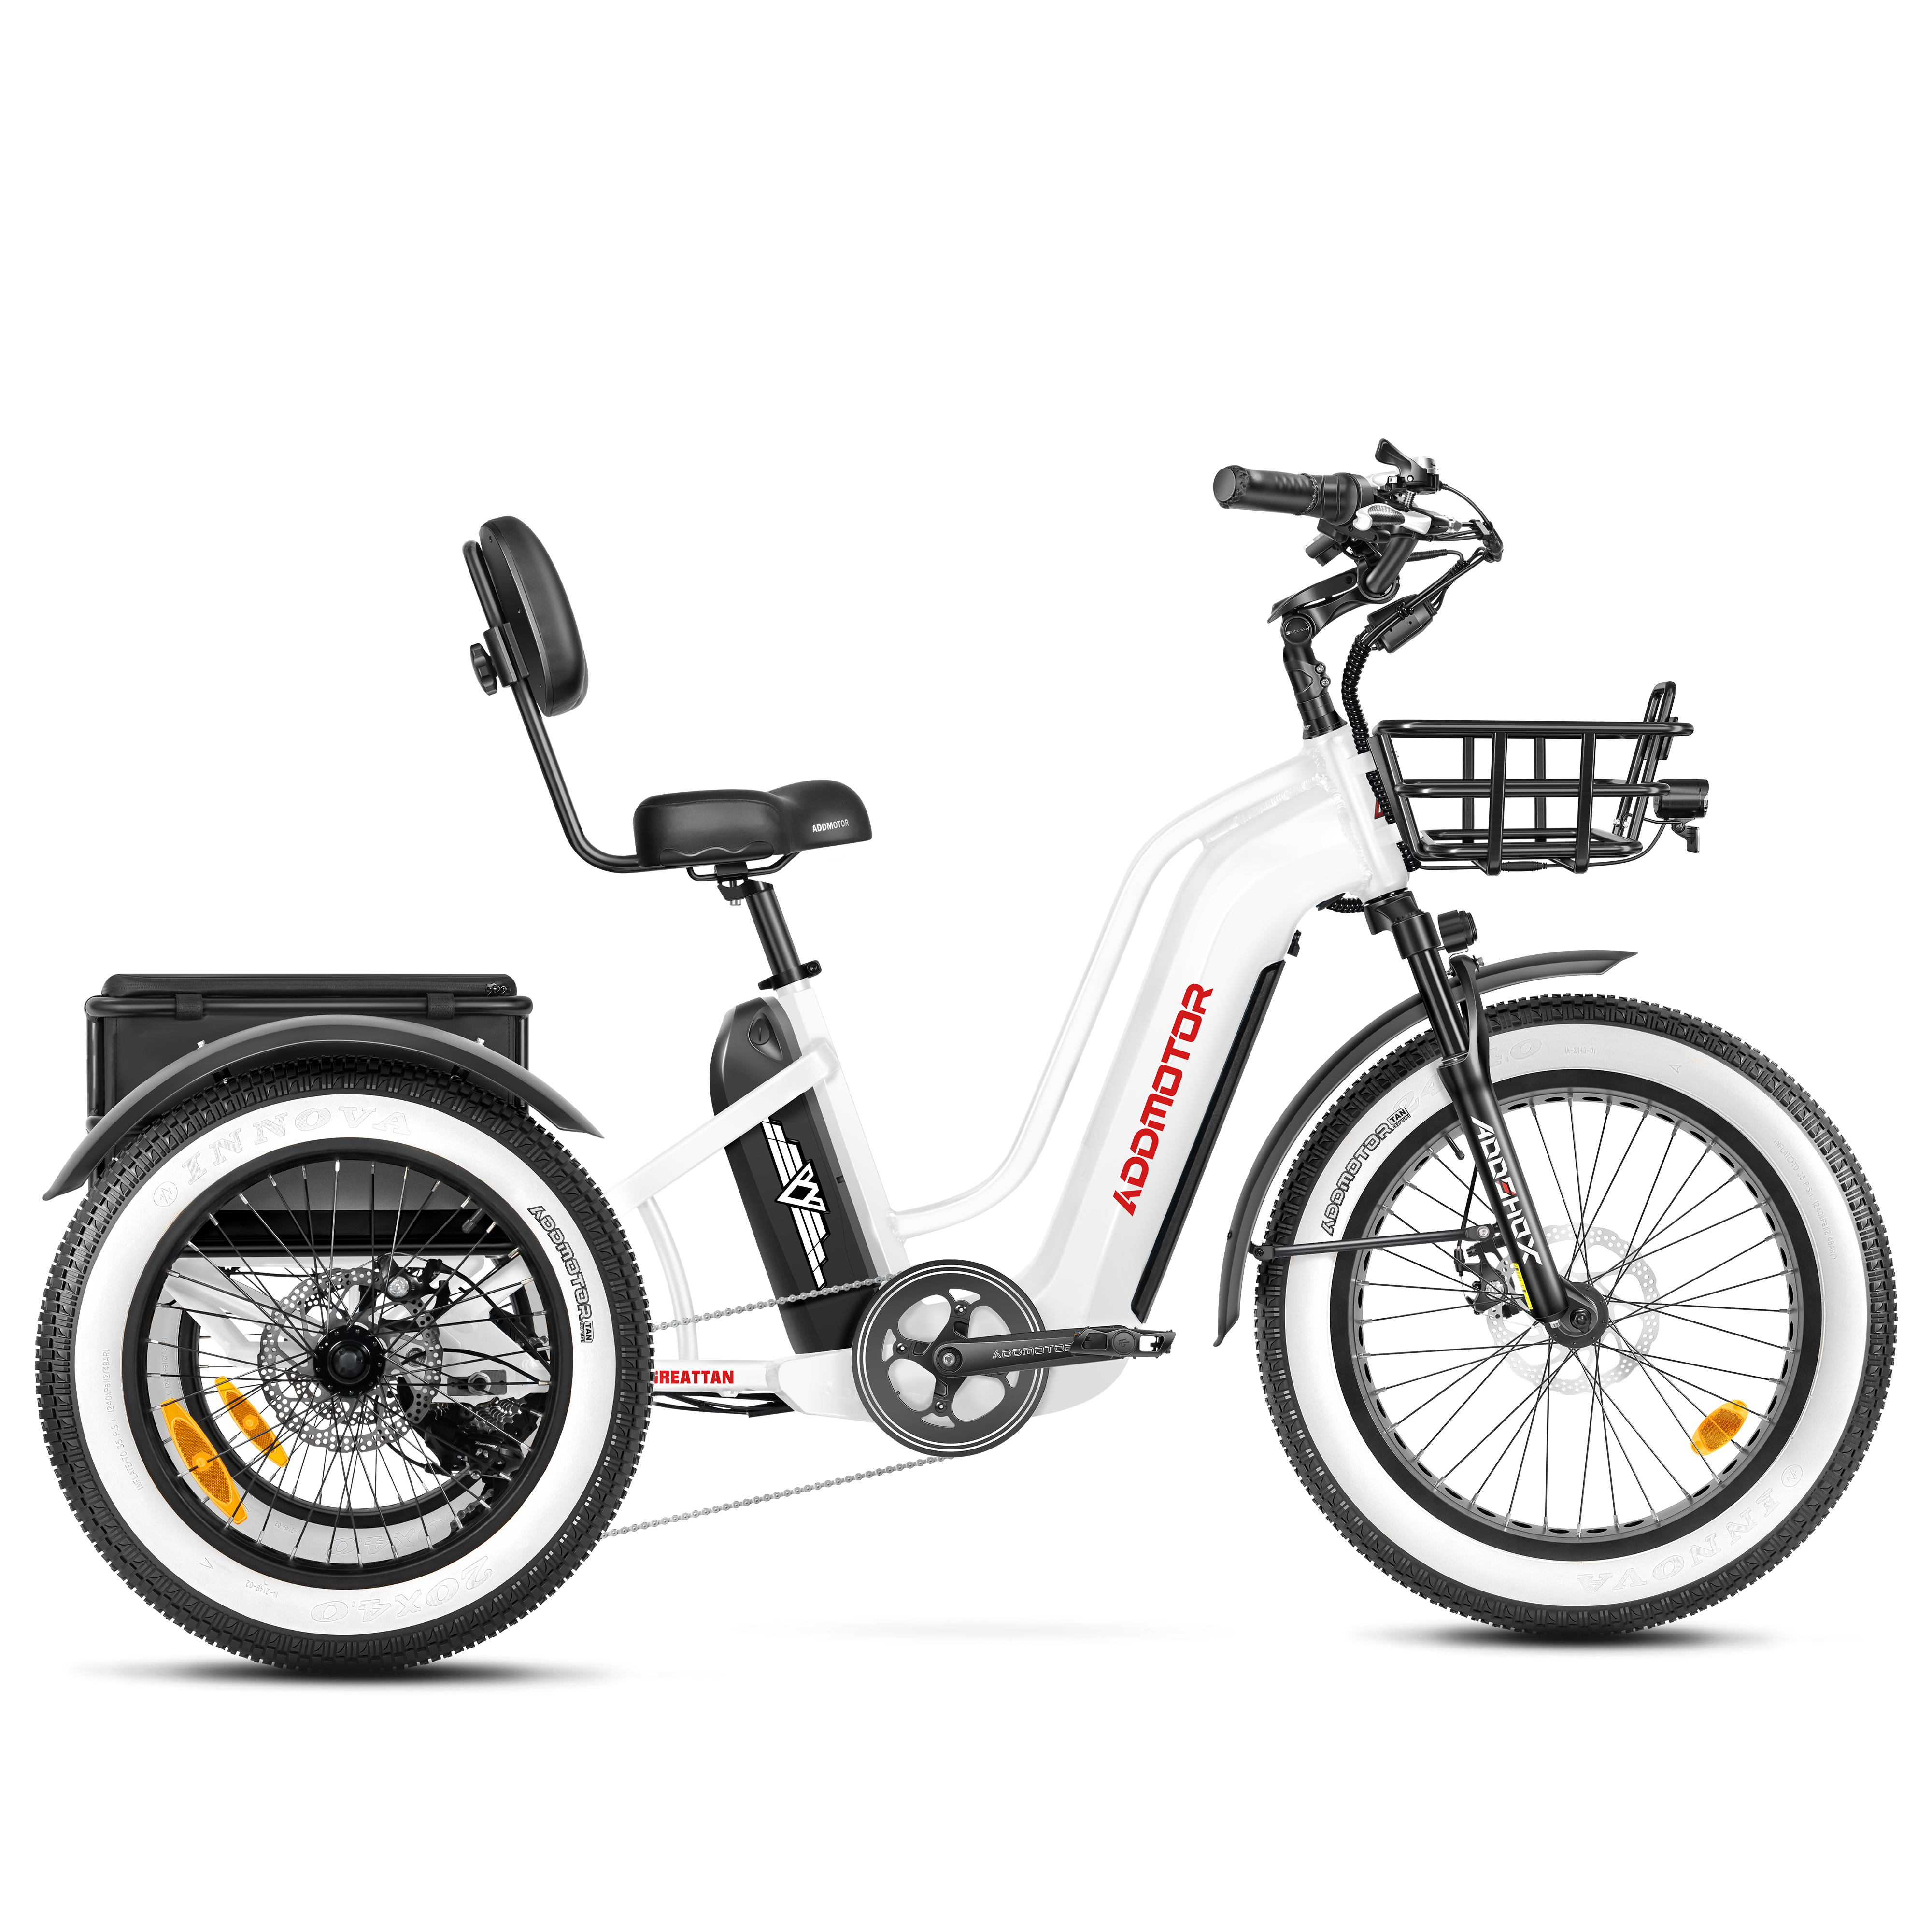 Addmotor Greattan Dual-Battery Electric Trike for Adult | Fat Tire Built-in Battery Design Electric Tricycle | Up to 160+ Miles Range | Pearl White